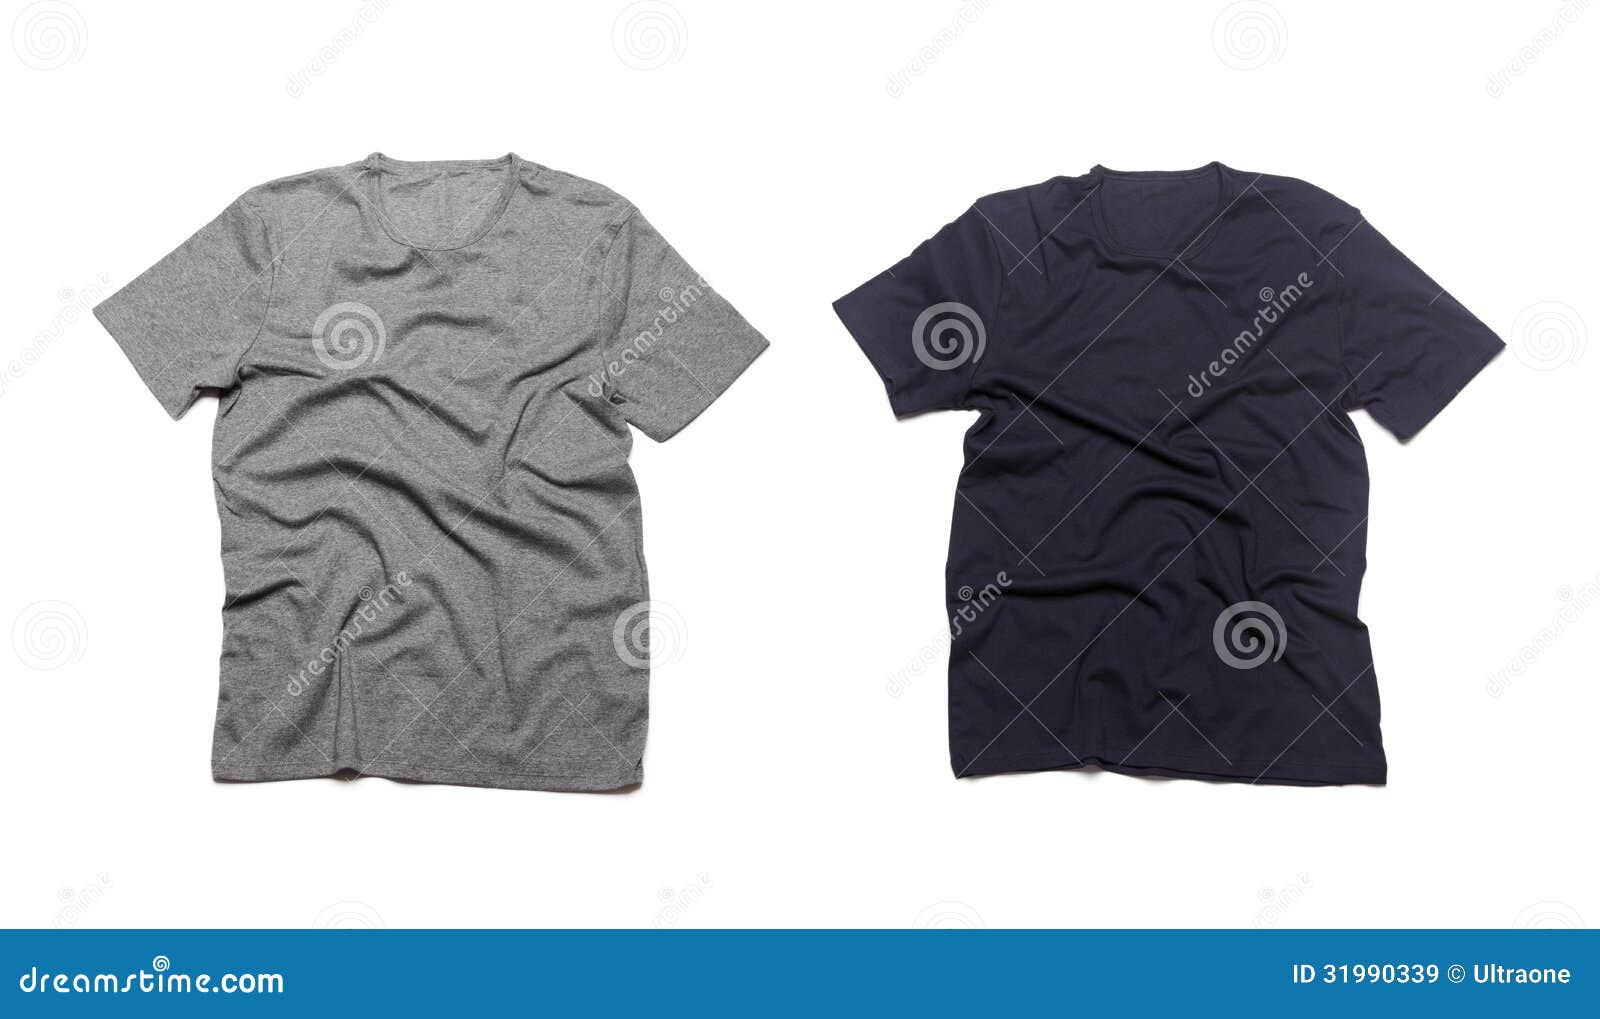 Blank grey t-shirts. stock image. Image of textile, cotton - 31990339